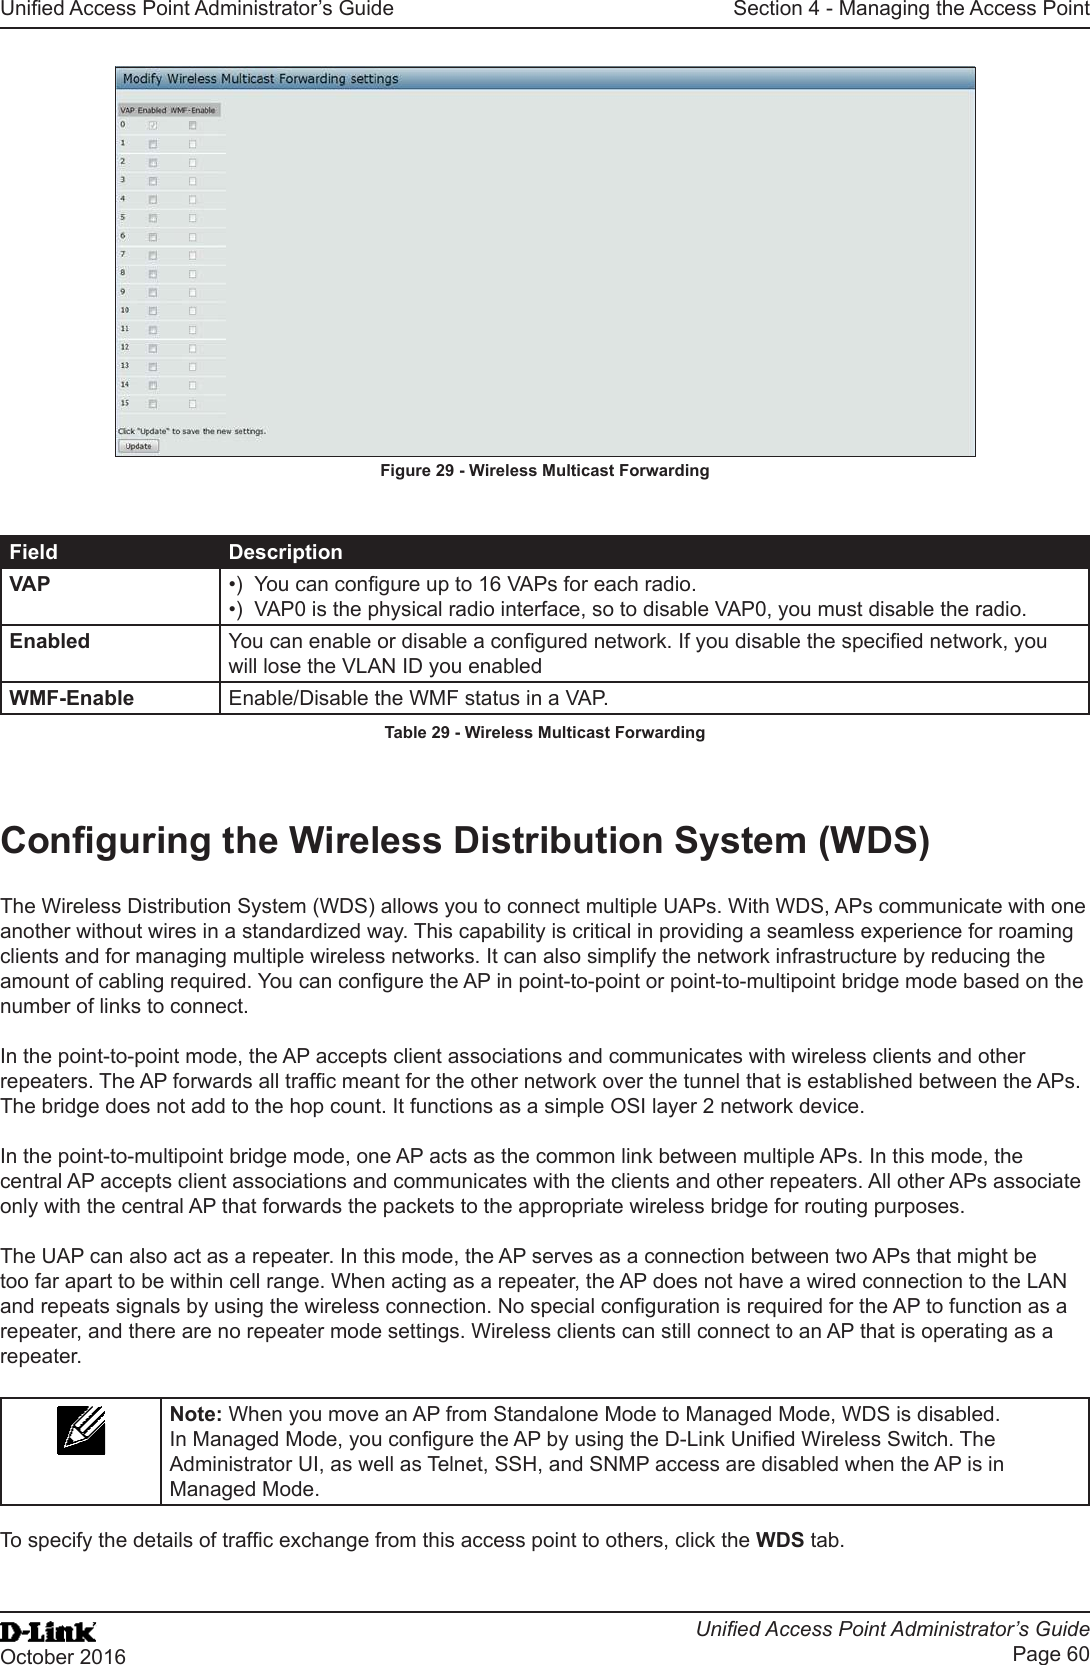 Unied Access Point Administrator’s GuideUnied Access Point Administrator’s GuidePage 60October 2016Section 4 - Managing the Access PointFigure 29 - Wireless Multicast ForwardingField DescriptionVAP •)  You can congure up to 16 VAPs for each radio.•)  VAP0 is the physical radio interface, so to disable VAP0, you must disable the radio.Enabled You can enable or disable a congured network. If you disable the specied network, you will lose the VLAN ID you enabledWMF-Enable Enable/Disable the WMF status in a VAP.Table 29 - Wireless Multicast ForwardingConguring the Wireless Distribution System (WDS)The Wireless Distribution System (WDS) allows you to connect multiple UAPs. With WDS, APs communicate with one another without wires in a standardized way. This capability is critical in providing a seamless experience for roaming clients and for managing multiple wireless networks. It can also simplify the network infrastructure by reducing the amount of cabling required. You can congure the AP in point-to-point or point-to-multipoint bridge mode based on the number of links to connect.In the point-to-point mode, the AP accepts client associations and communicates with wireless clients and other repeaters. The AP forwards all trafc meant for the other network over the tunnel that is established between the APs. The bridge does not add to the hop count. It functions as a simple OSI layer 2 network device.In the point-to-multipoint bridge mode, one AP acts as the common link between multiple APs. In this mode, the central AP accepts client associations and communicates with the clients and other repeaters. All other APs associate only with the central AP that forwards the packets to the appropriate wireless bridge for routing purposes.The UAP can also act as a repeater. In this mode, the AP serves as a connection between two APs that might be too far apart to be within cell range. When acting as a repeater, the AP does not have a wired connection to the LAN and repeats signals by using the wireless connection. No special conguration is required for the AP to function as a repeater, and there are no repeater mode settings. Wireless clients can still connect to an AP that is operating as a repeater.Note: When you move an AP from Standalone Mode to Managed Mode, WDS is disabled. In Managed Mode, you congure the AP by using the D-Link Unied Wireless Switch. The Administrator UI, as well as Telnet, SSH, and SNMP access are disabled when the AP is in Managed Mode.To specify the details of trafc exchange from this access point to others, click the WDS tab.